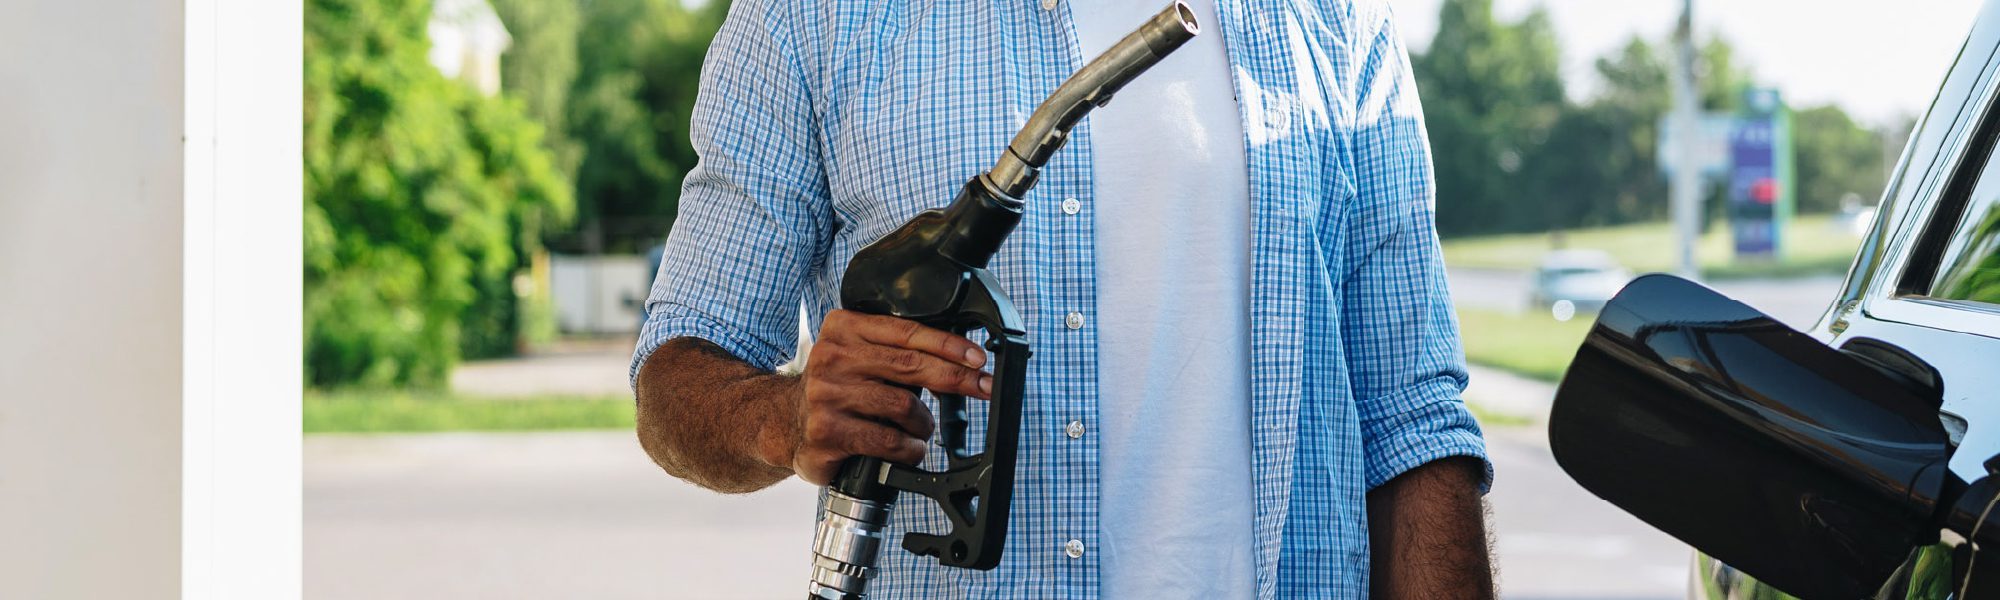 person holding gas nozzle at tank